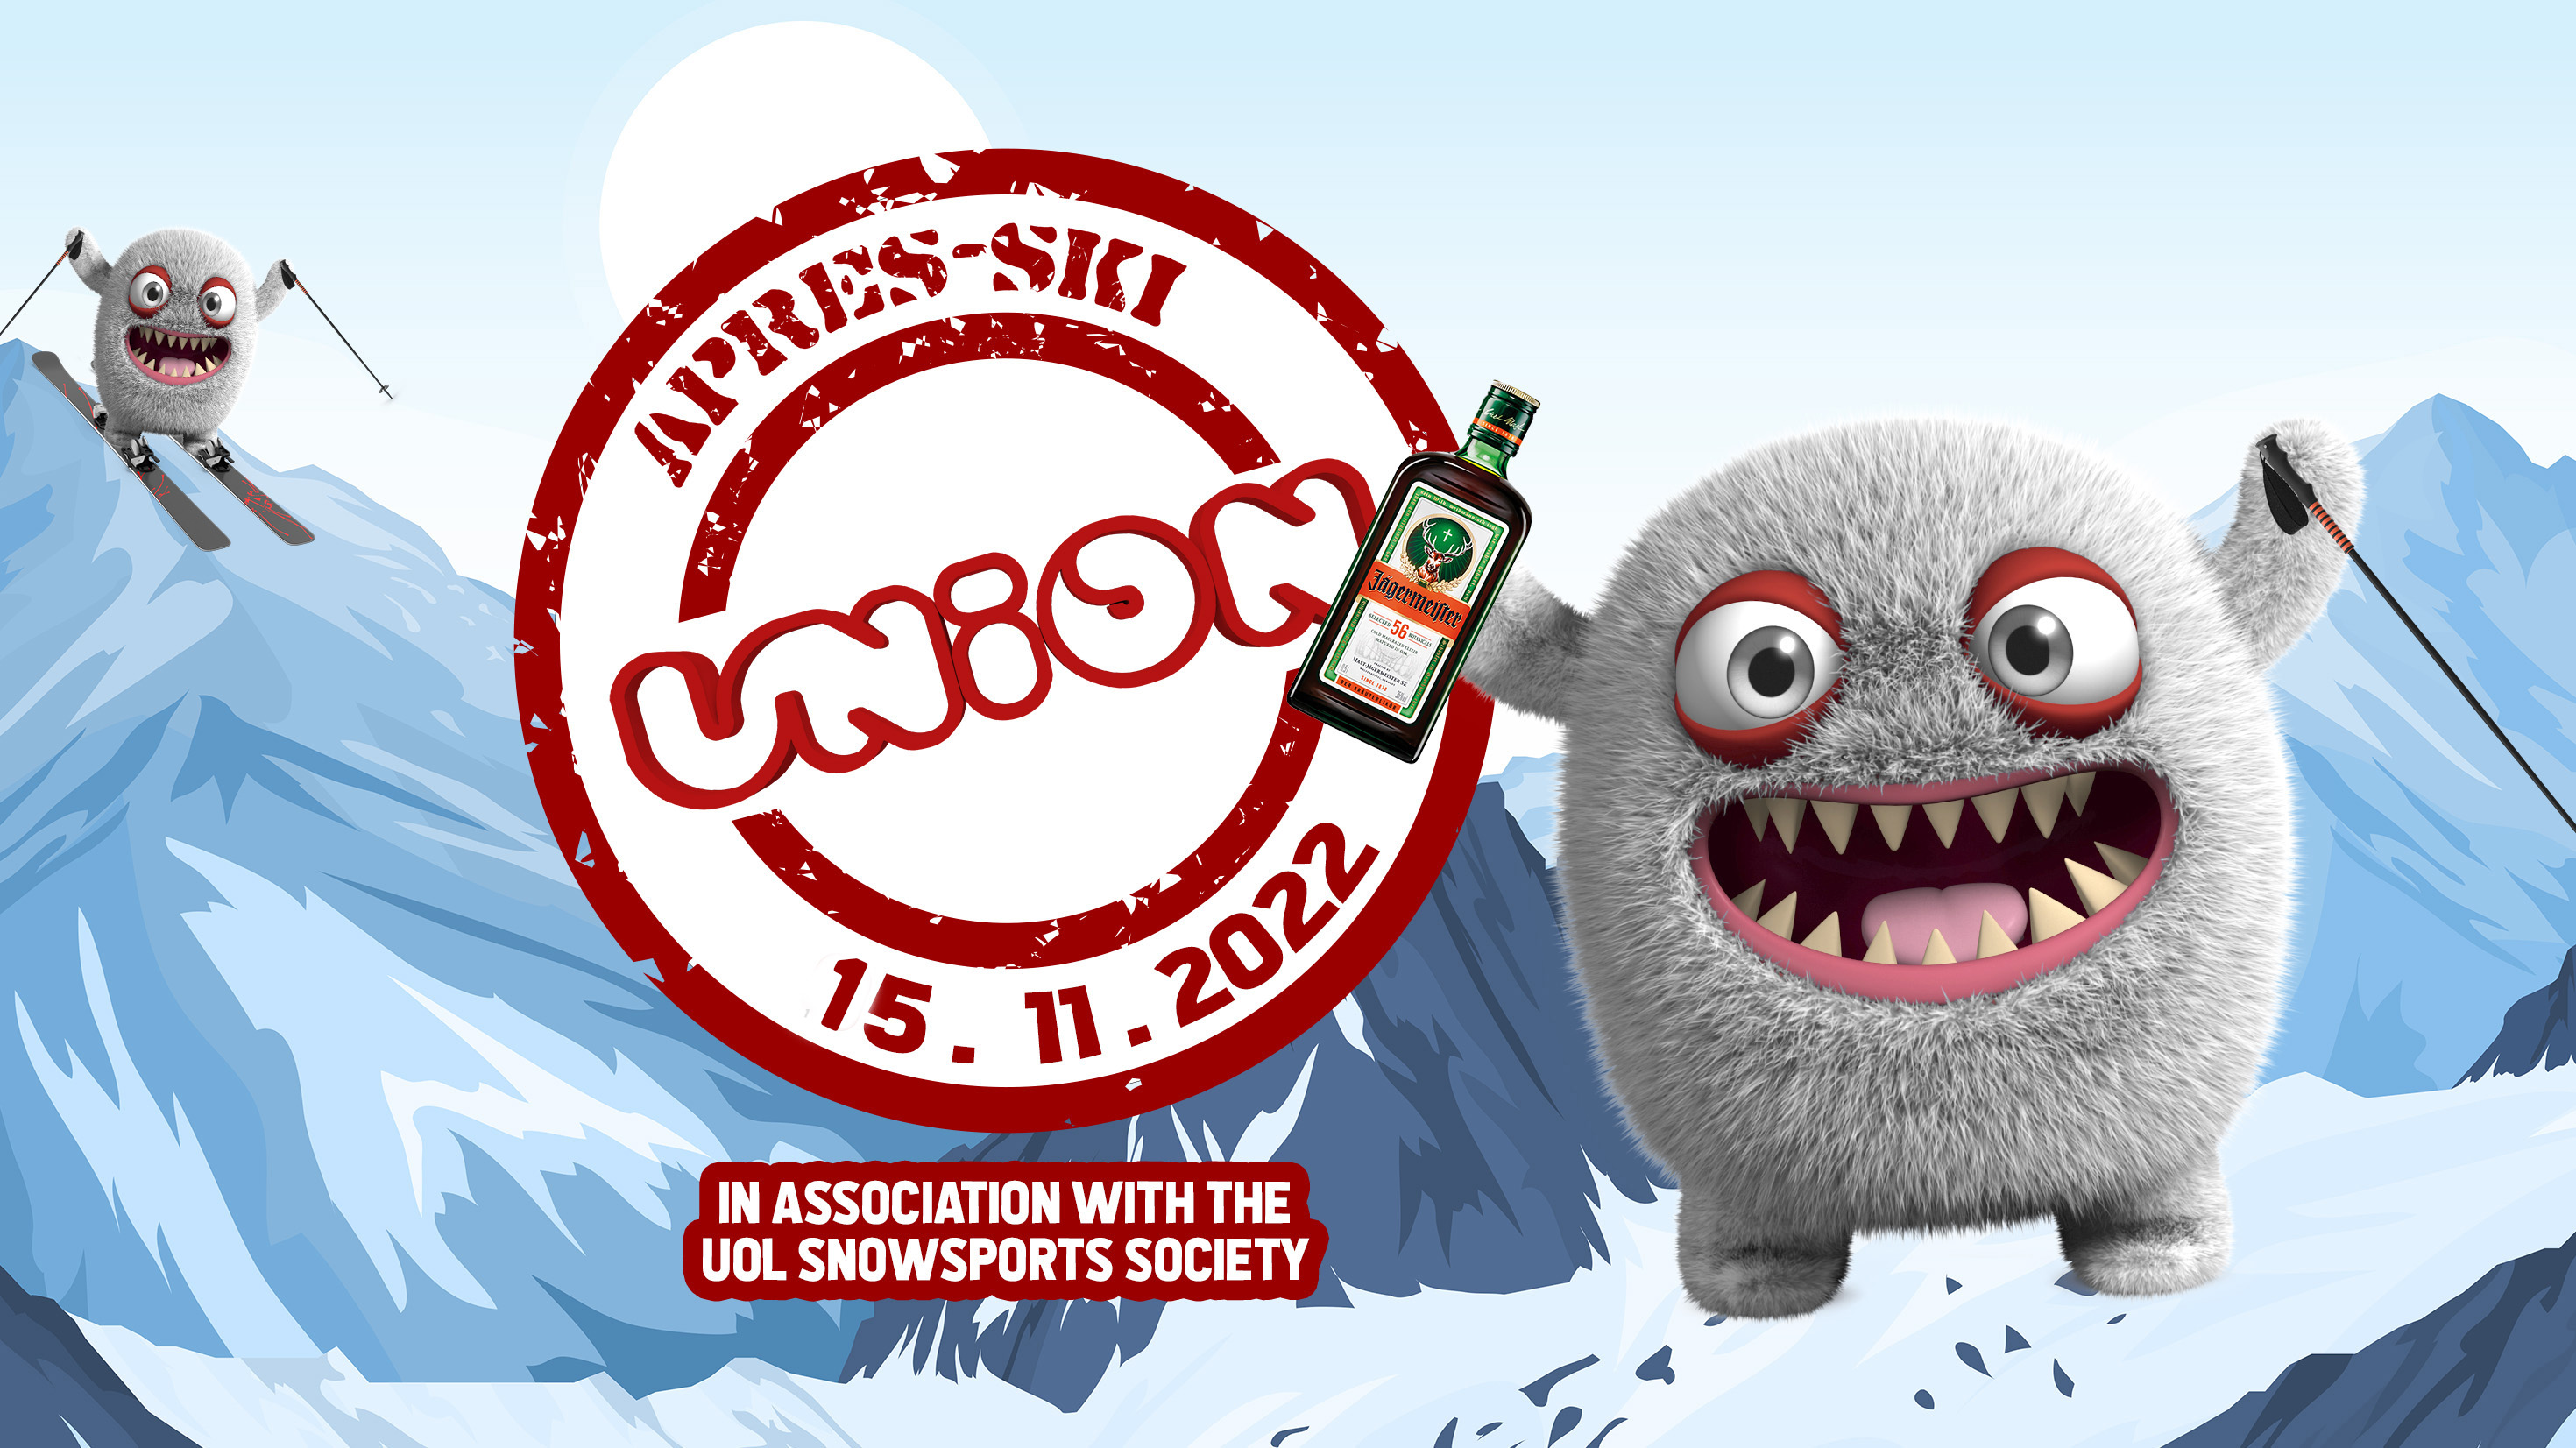 UNION TUESDAY’S PRESENTS APRES SKI HOSTED BY UOL SNOWSPORTS